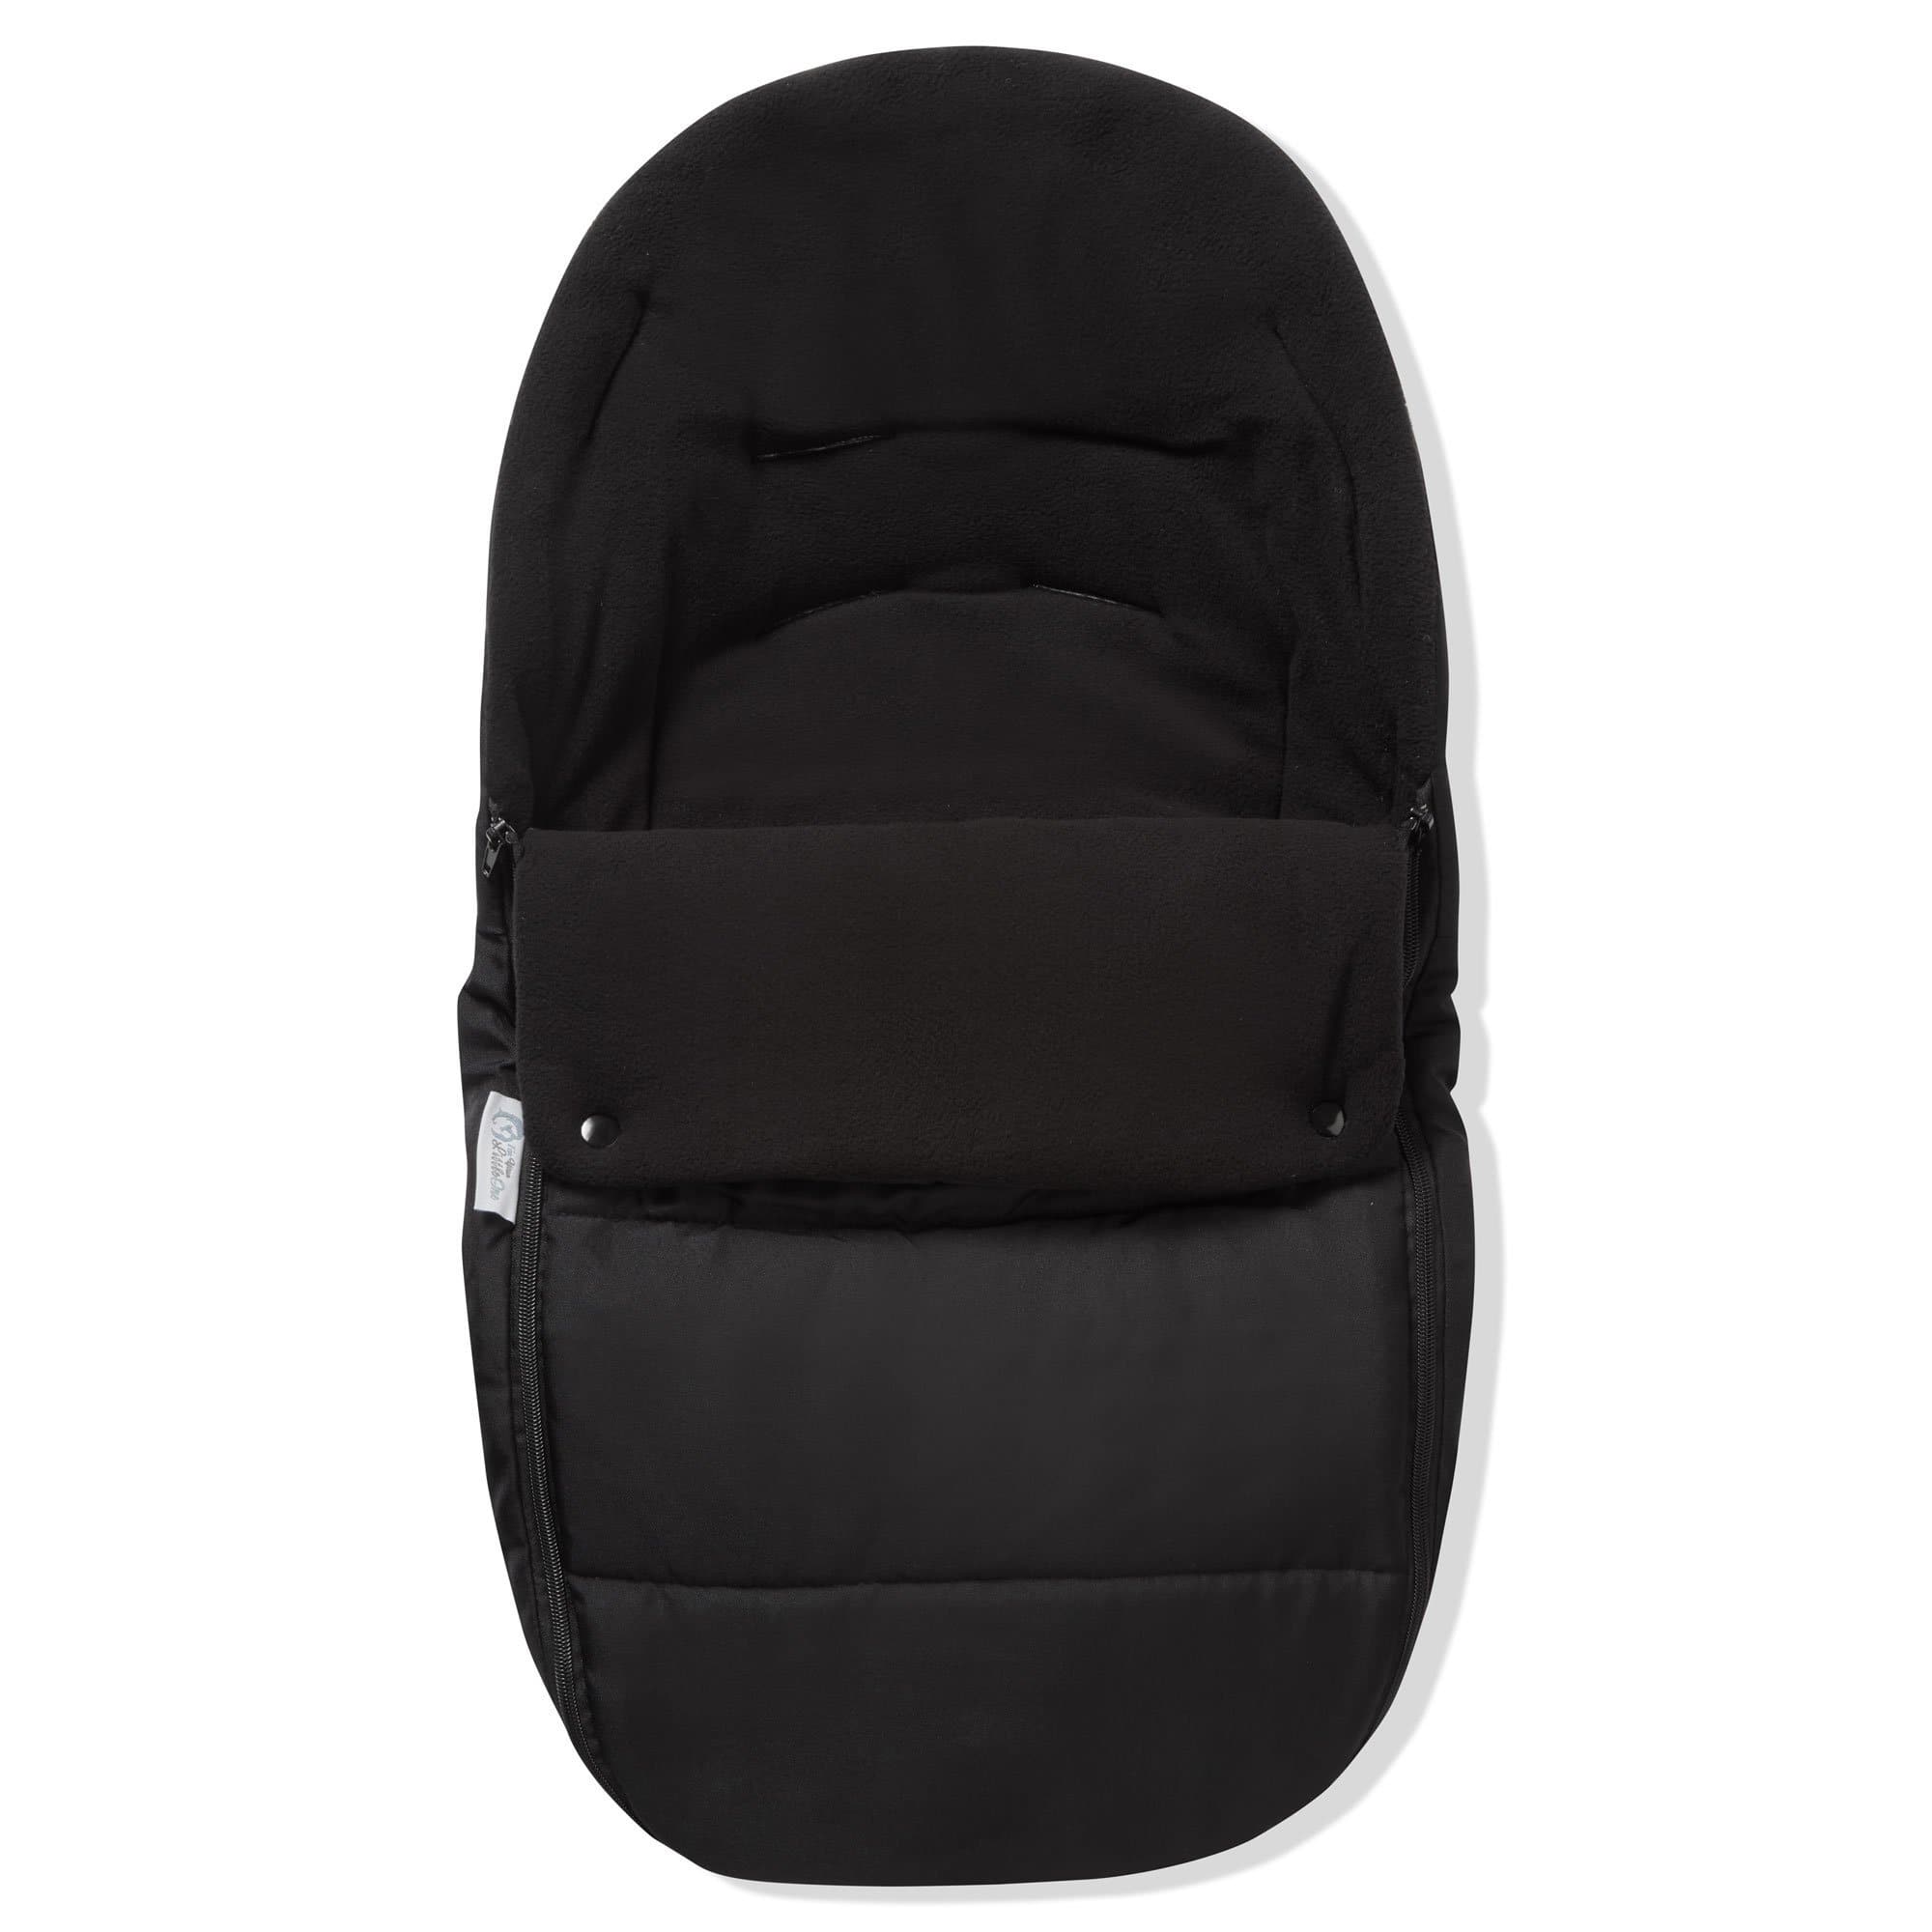 Premium Car Seat Footmuff / Cosy Toes Compatible With Bebecar - Black Jack / Fits All Models | For Your Little One